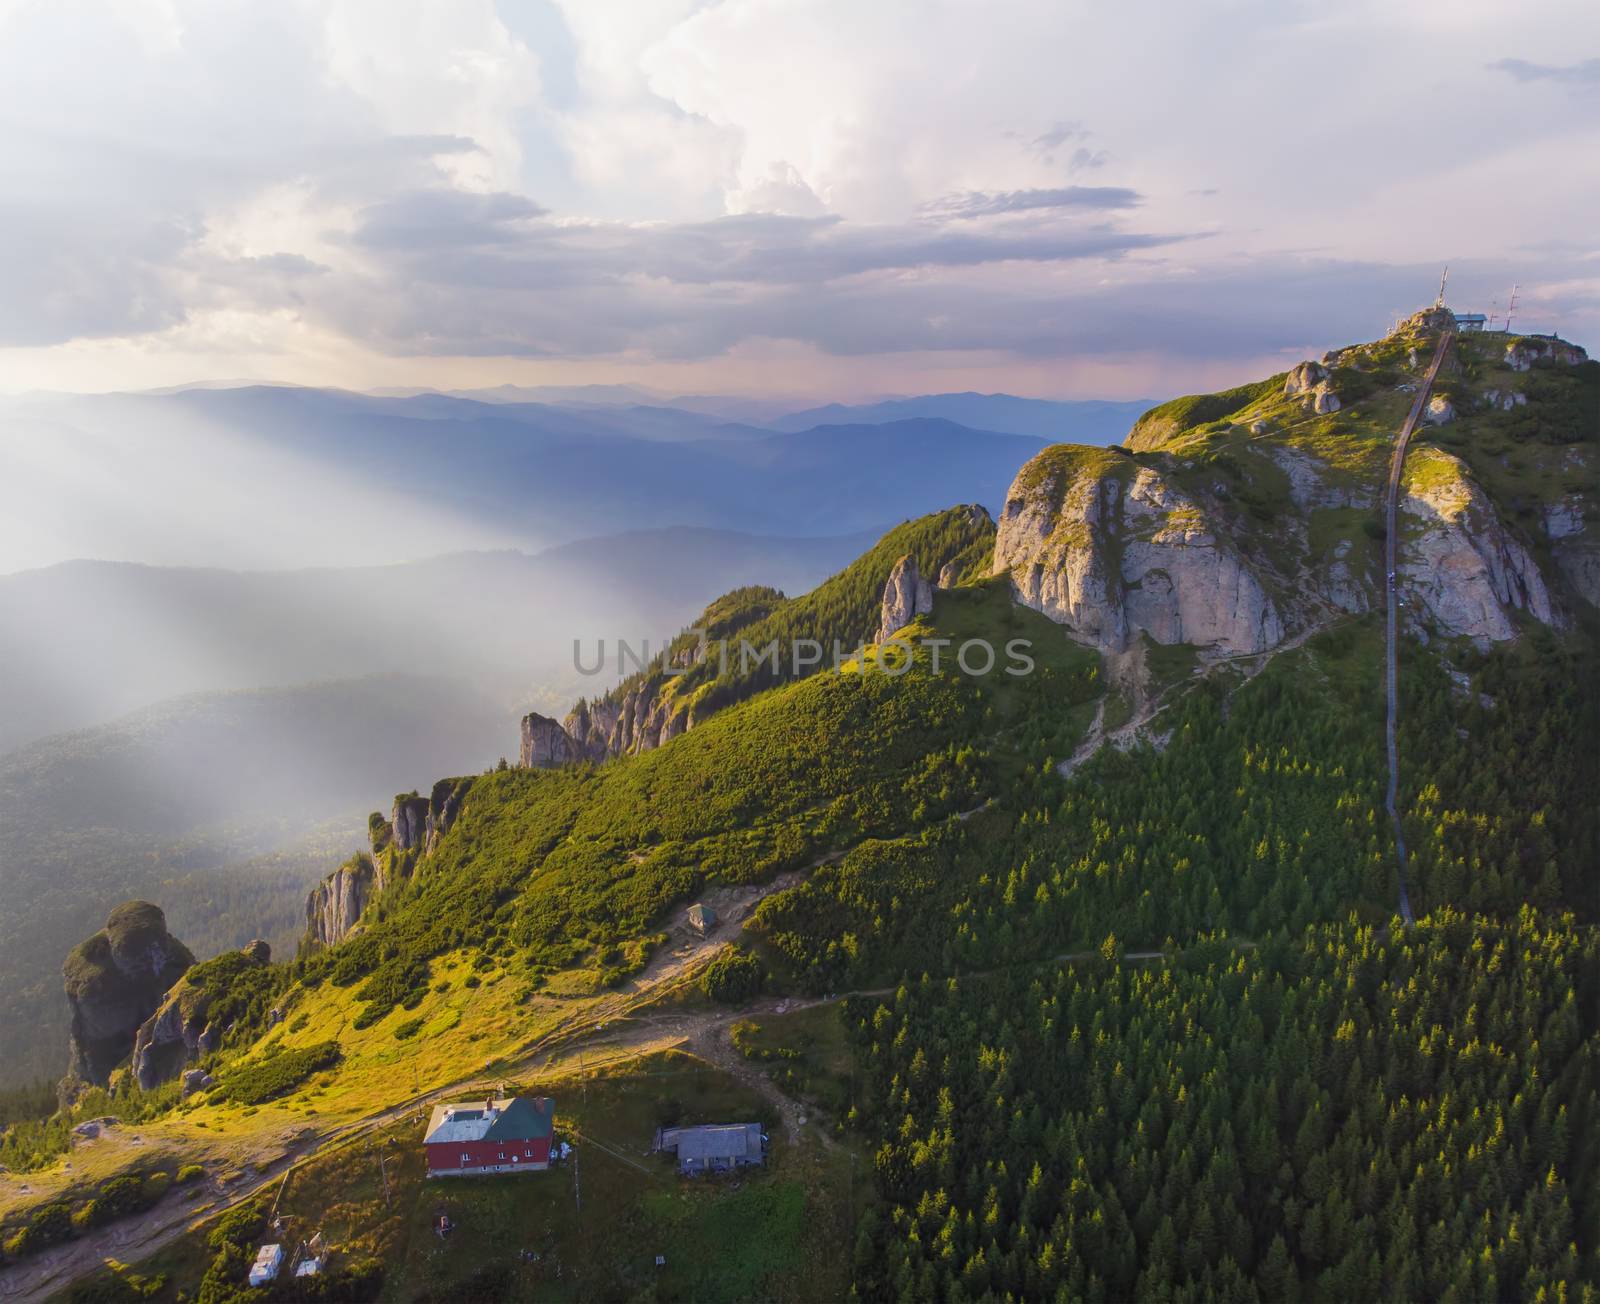 Sunset landscape from above, mountain chalet and rocky peak in Romanian Carpathians.